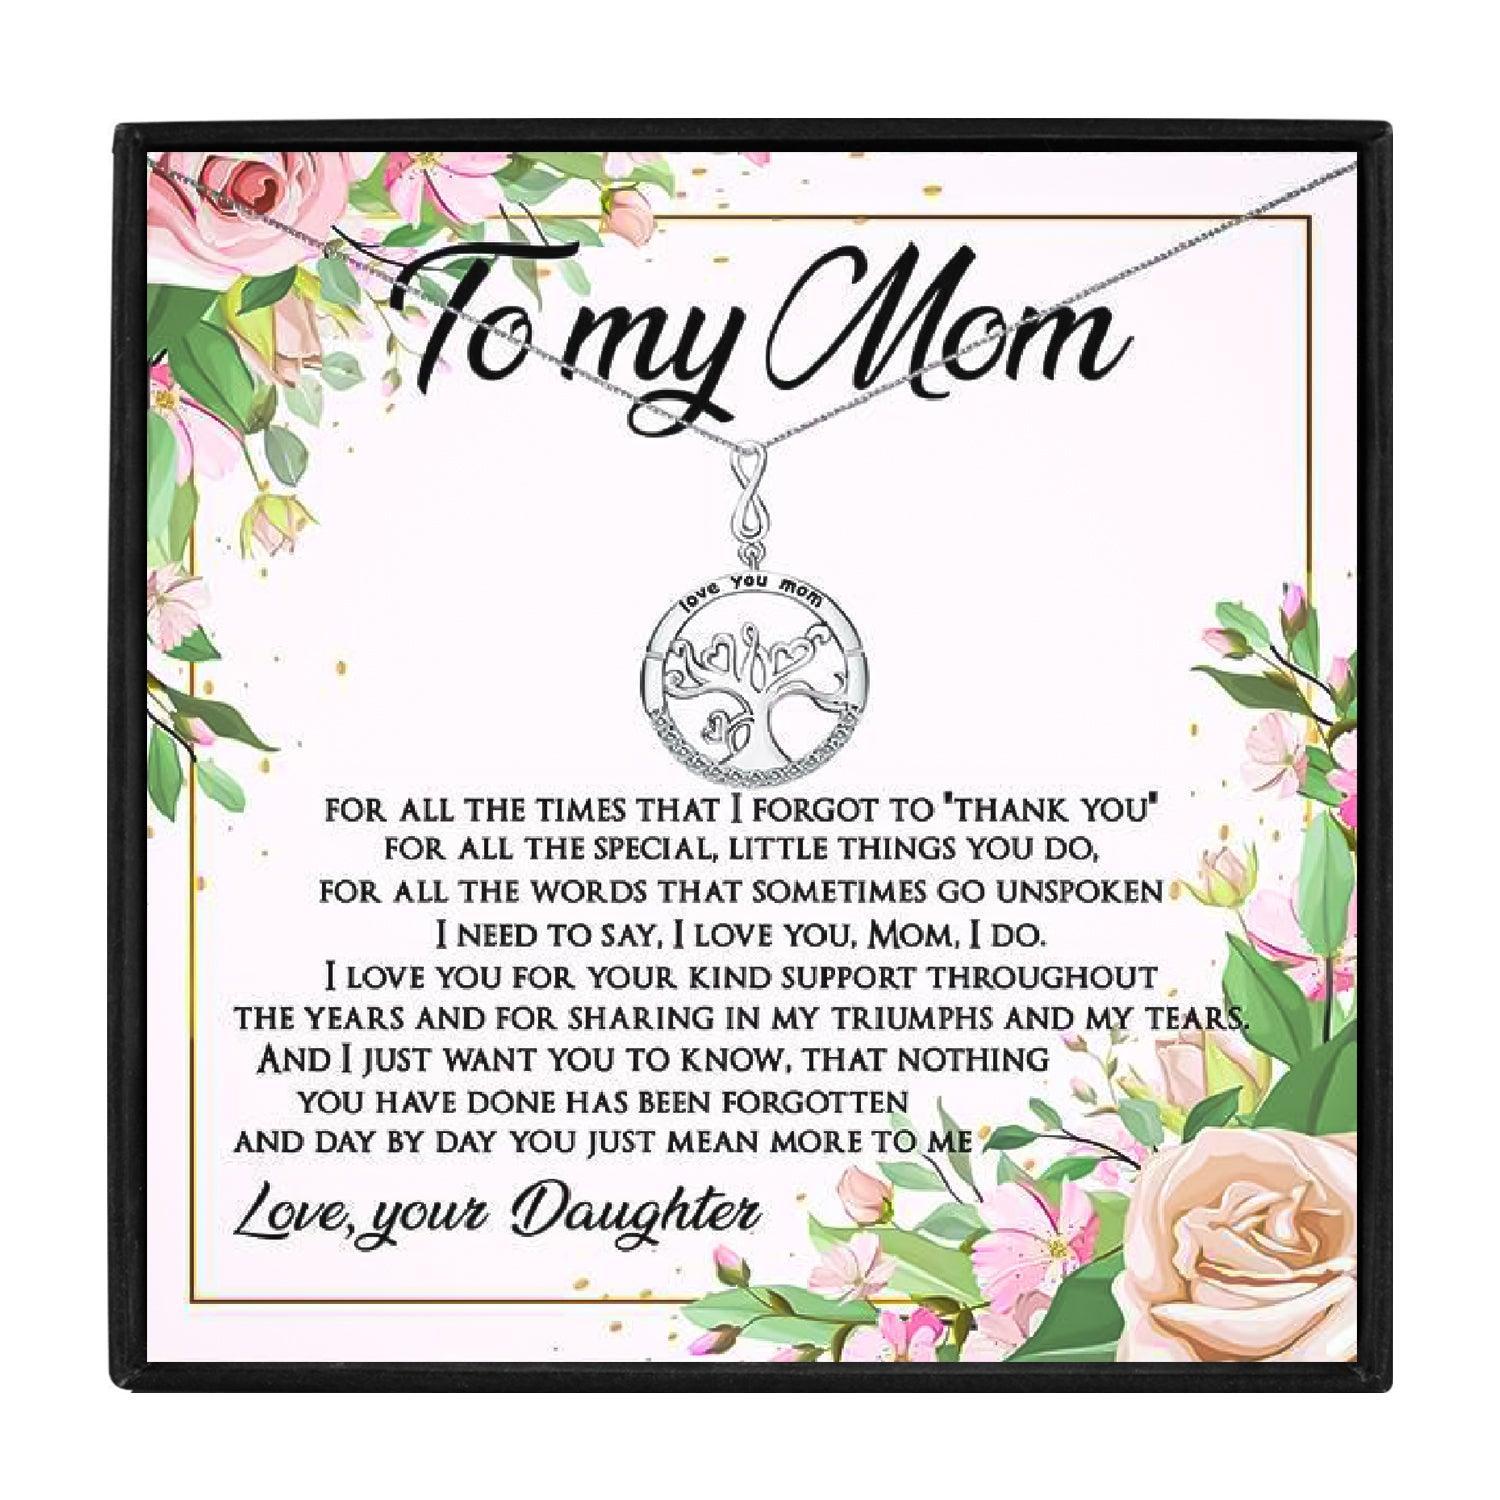 Love You Mom Tree Pendant Necklace From Daughter for Christmas 2023 | Love You Mom Tree Pendant Necklace From Daughter - undefined | Love You Mom Tree Pendant Necklace, Mom Gift Necklace, Mom Necklace Gift | From Hunny Life | hunnylife.com